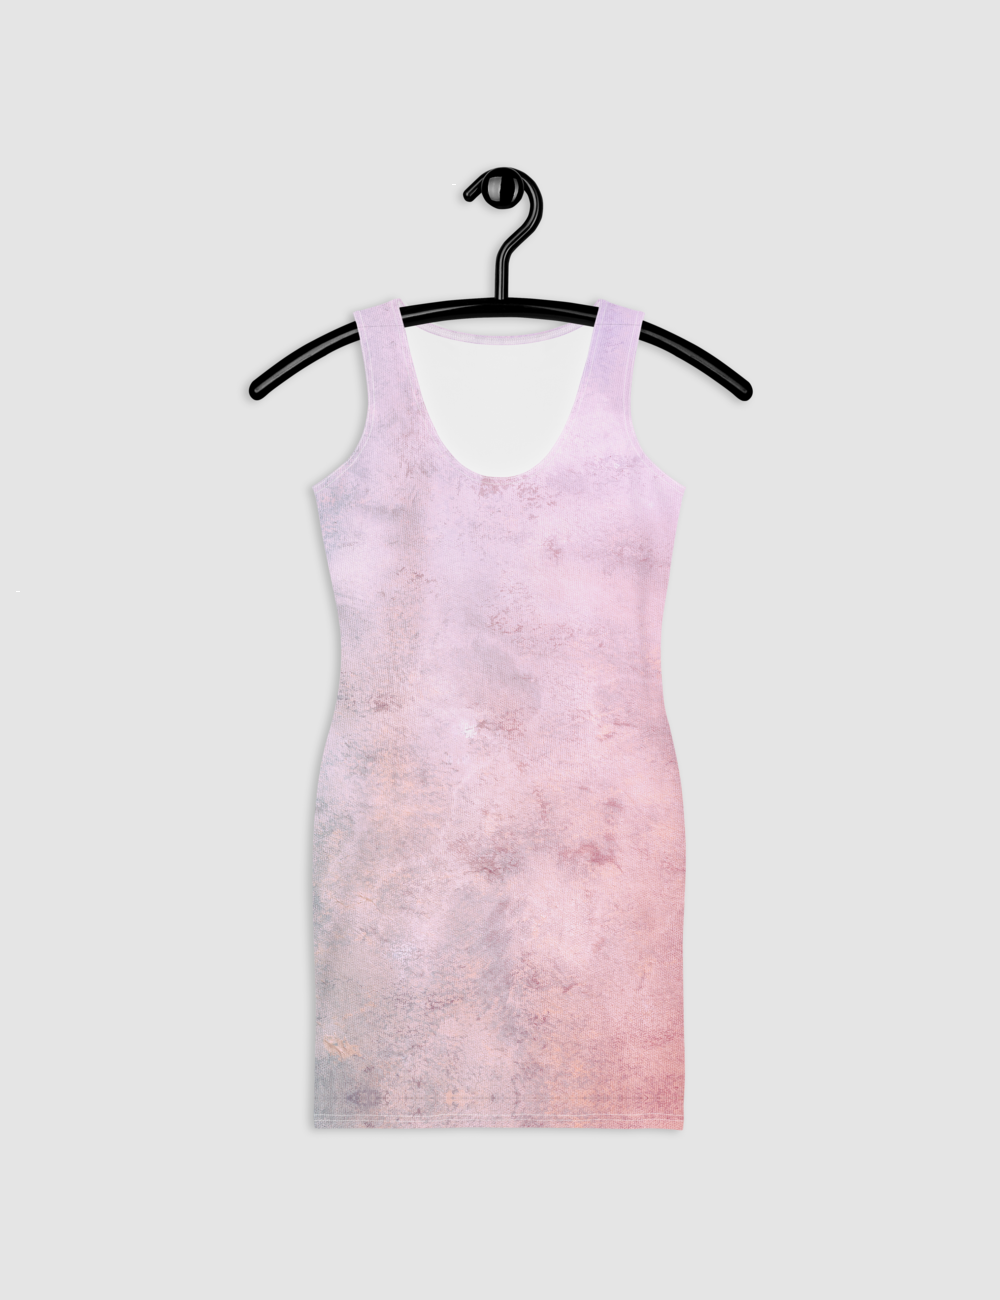 Painted Concrete Abstract | Women's Sleeveless Fitted Sublimated Dress OniTakai